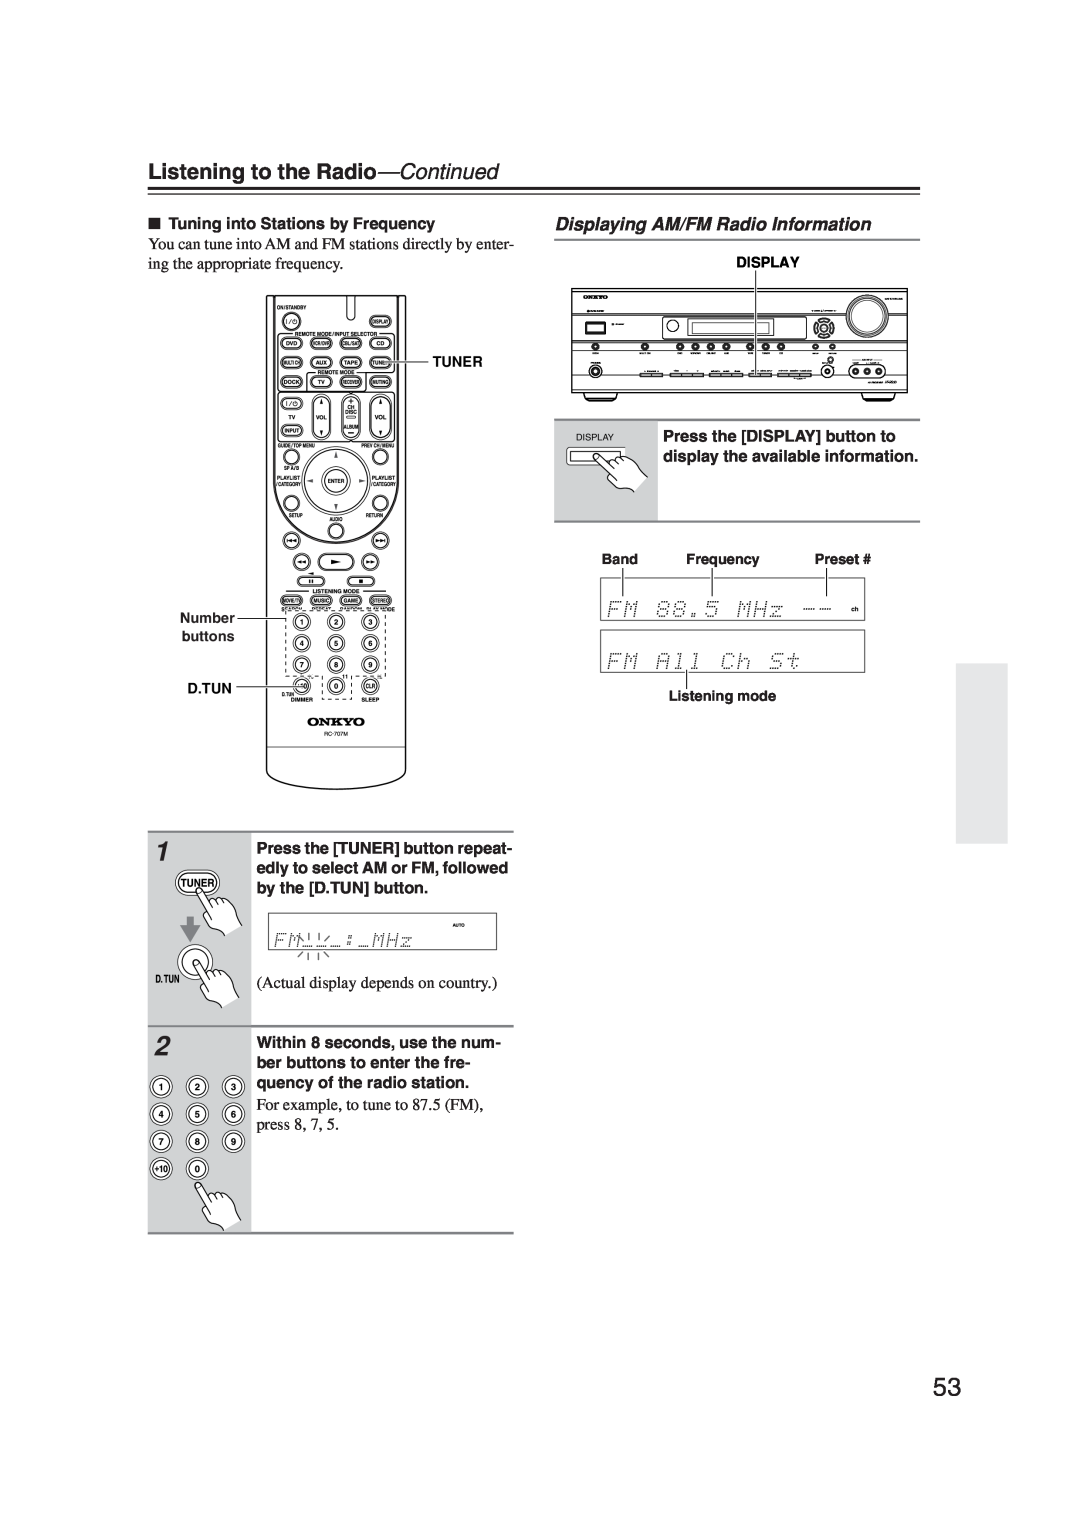 Onkyo S5100 instruction manual Displaying AM/FM Radio Information, Listening to the Radio—Continued 